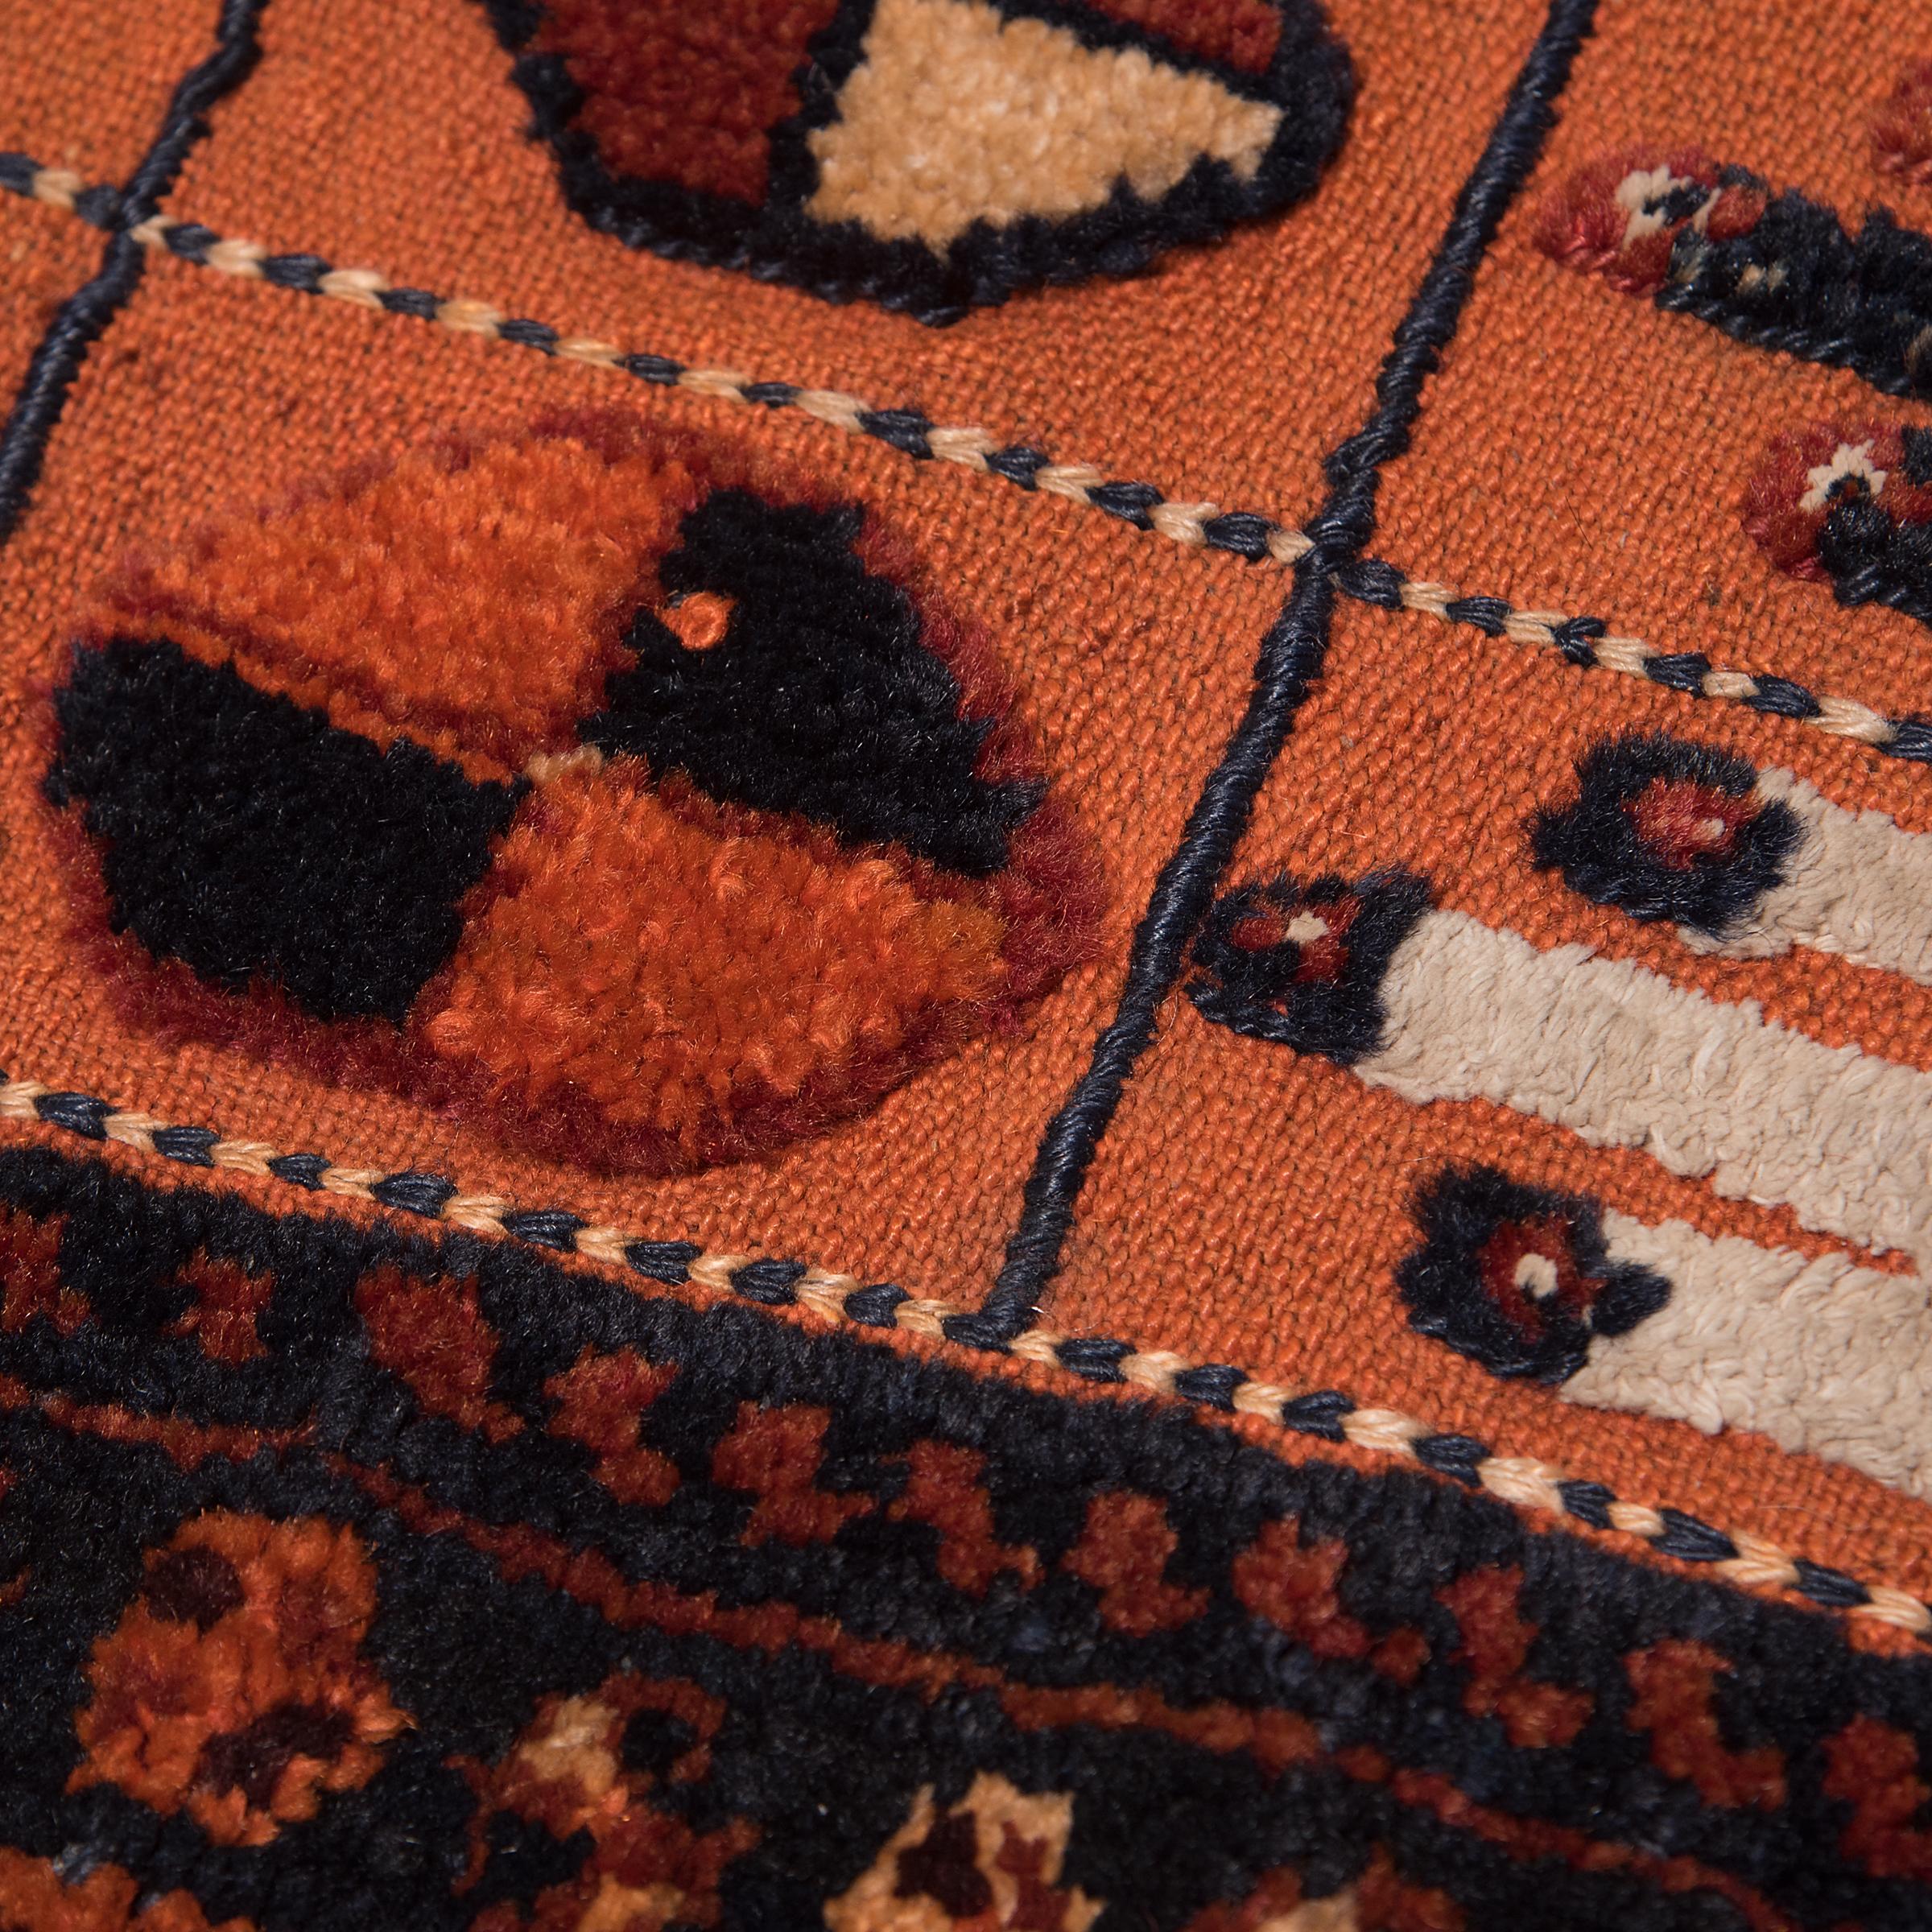 Woven in the late 19th century, this colorful Turkmen textile was originally used by a nomadic traveler as an artful covering for his horse. Placed between the saddle and the horse, the blanket cushioned the rigid saddle, protected from harsh winds,